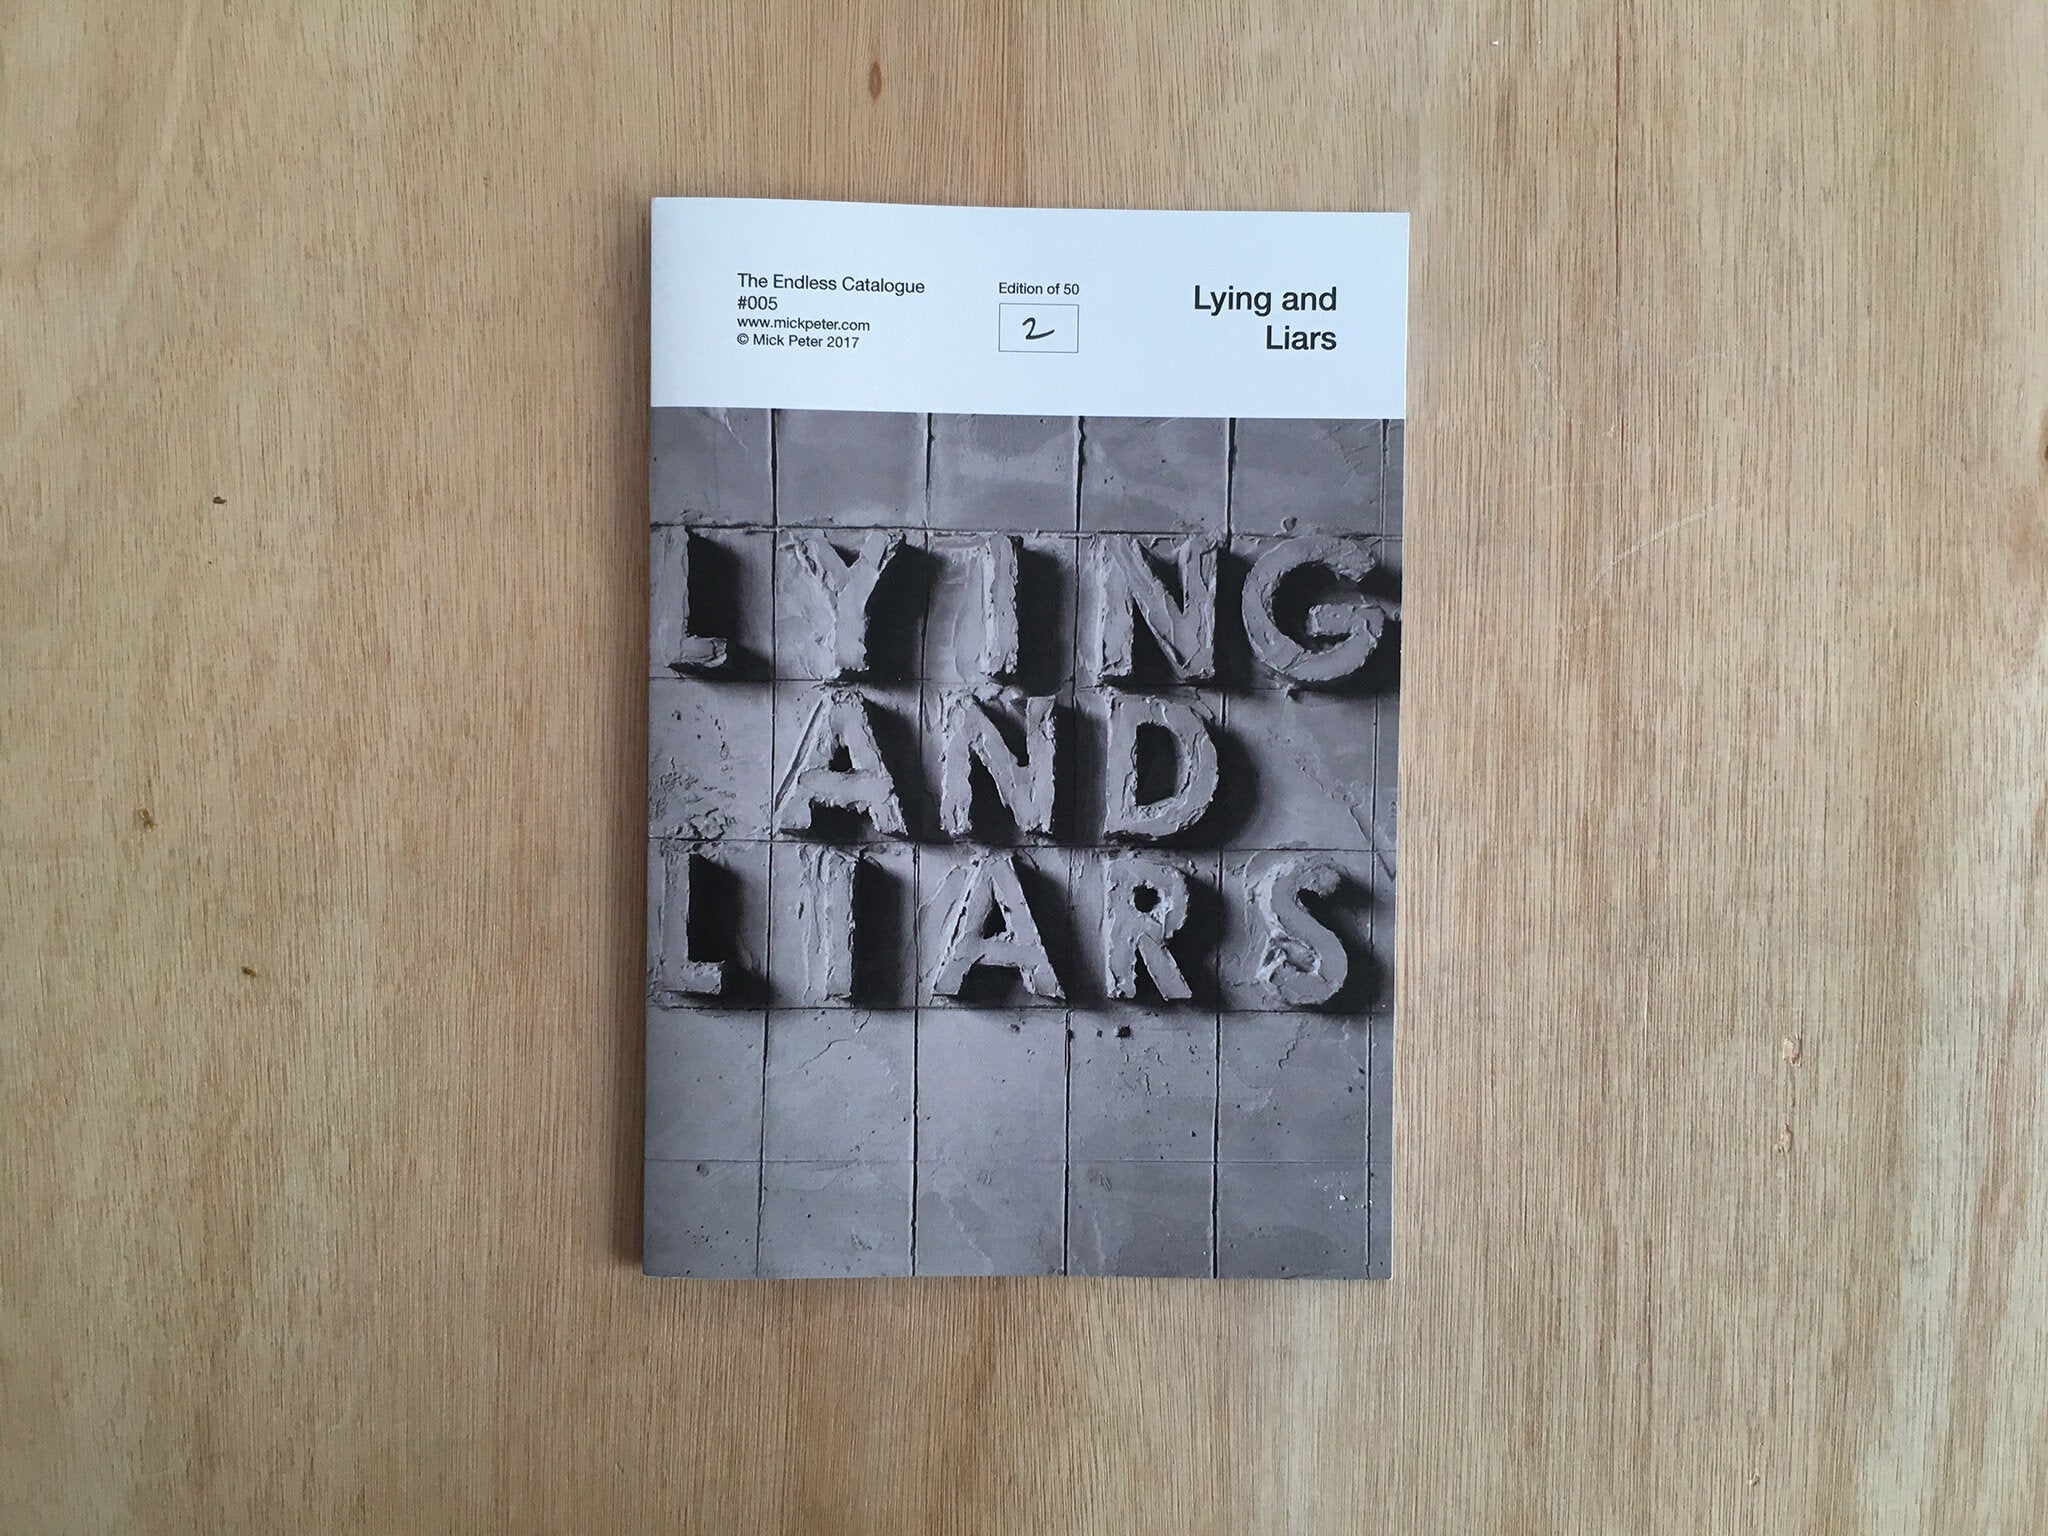 LYING AND LIARS by Mick Peter